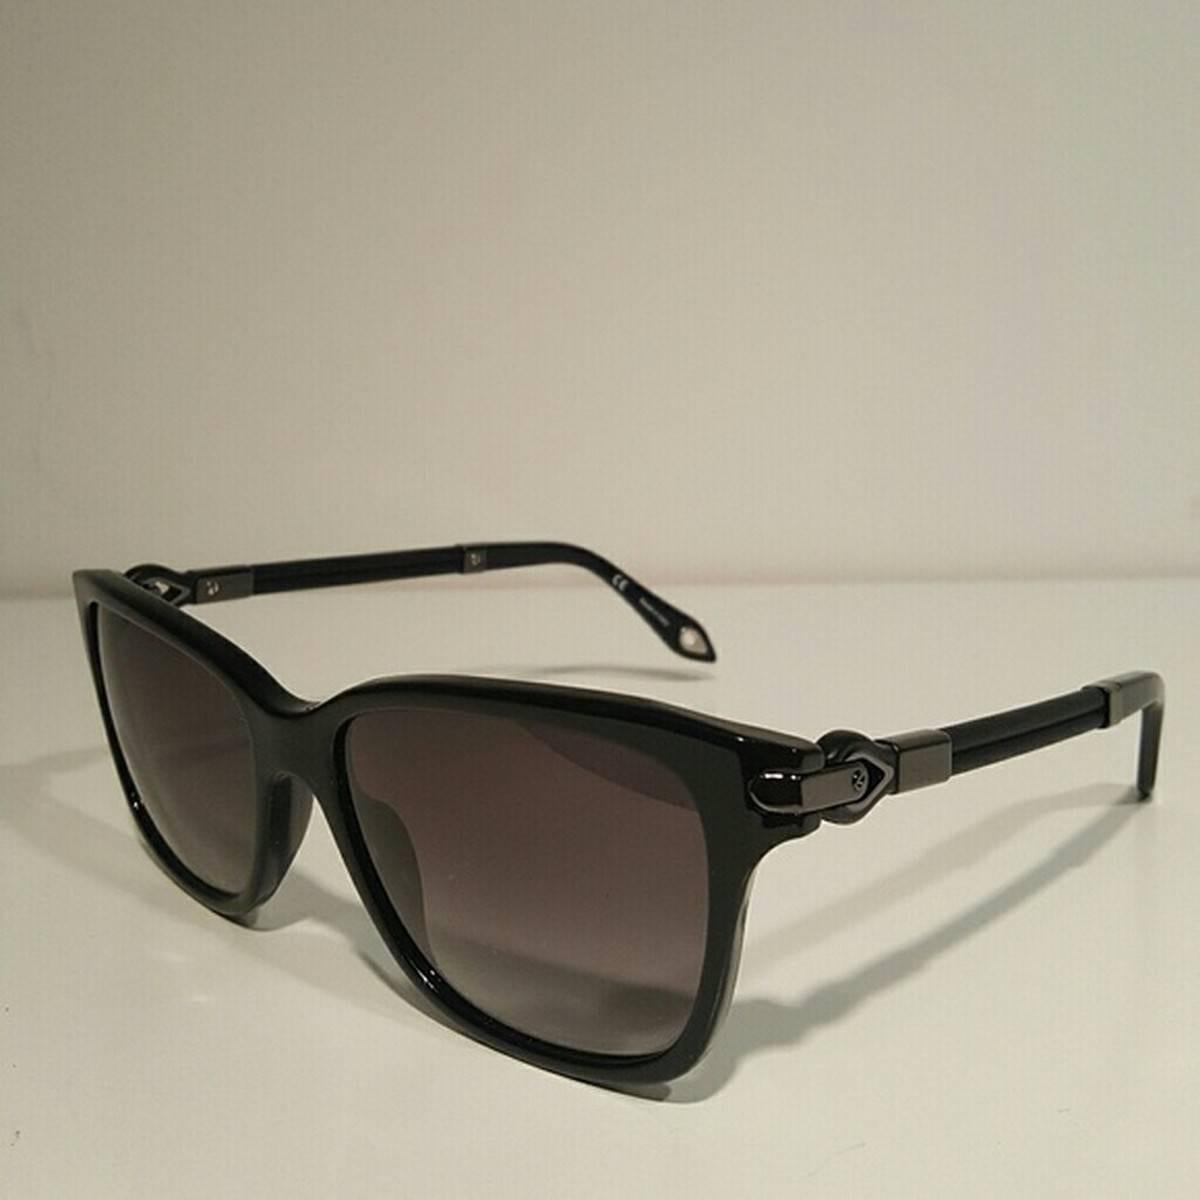 Givenchy Black Wayfarer Sunglasses
Color: Black
Size: OS

Brand new with box.
Unused condition.
No flaws.
Made in Italy.